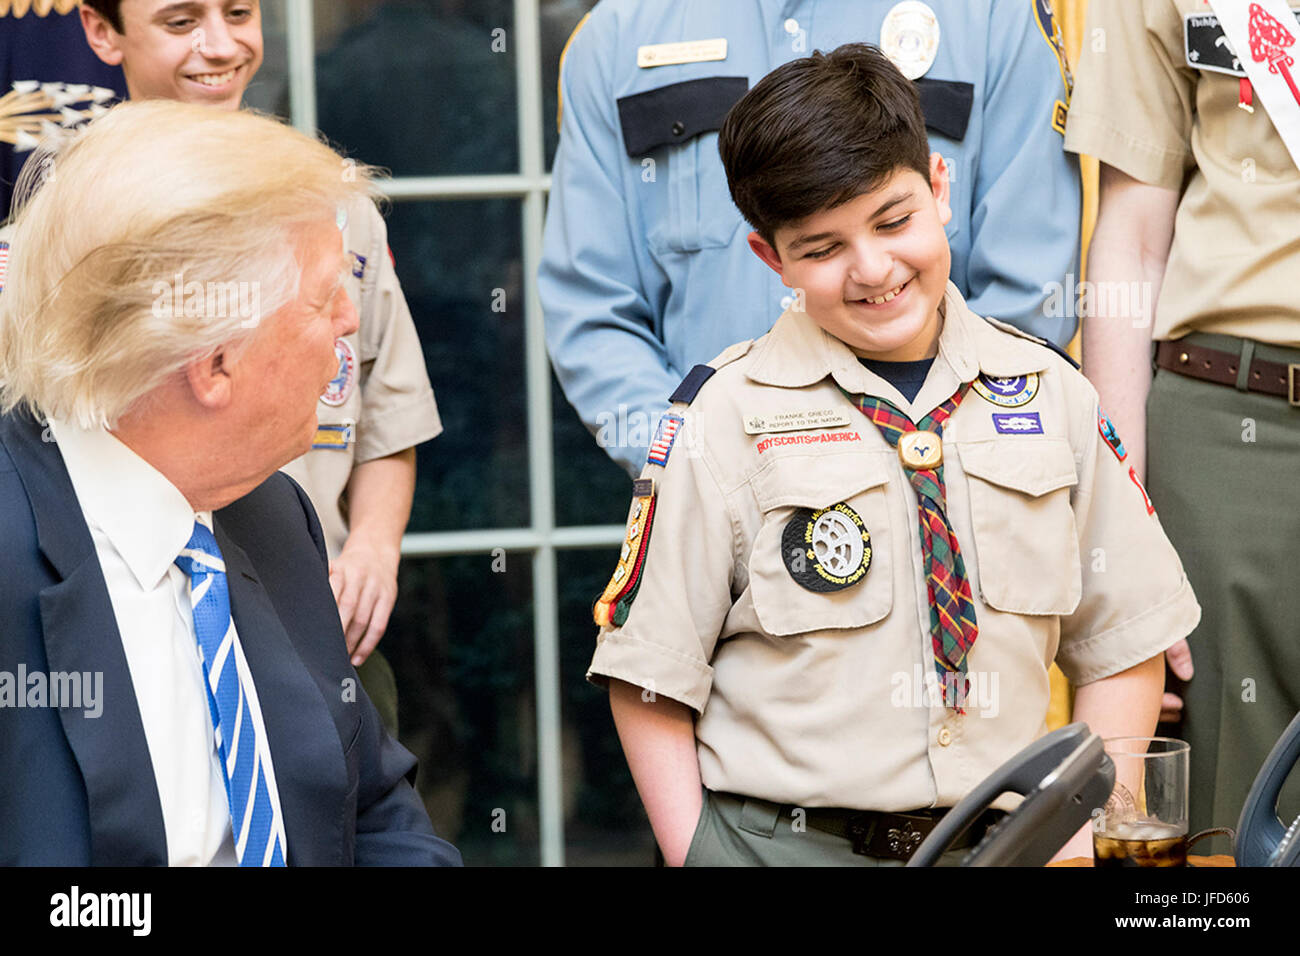 President Donald Trump shares a laugh with a member of the Boy Scouts of America, Tuesday, March 7, 2017, in the Oval Office. (Official White House Photo by Shealah Craighead) Stock Photo